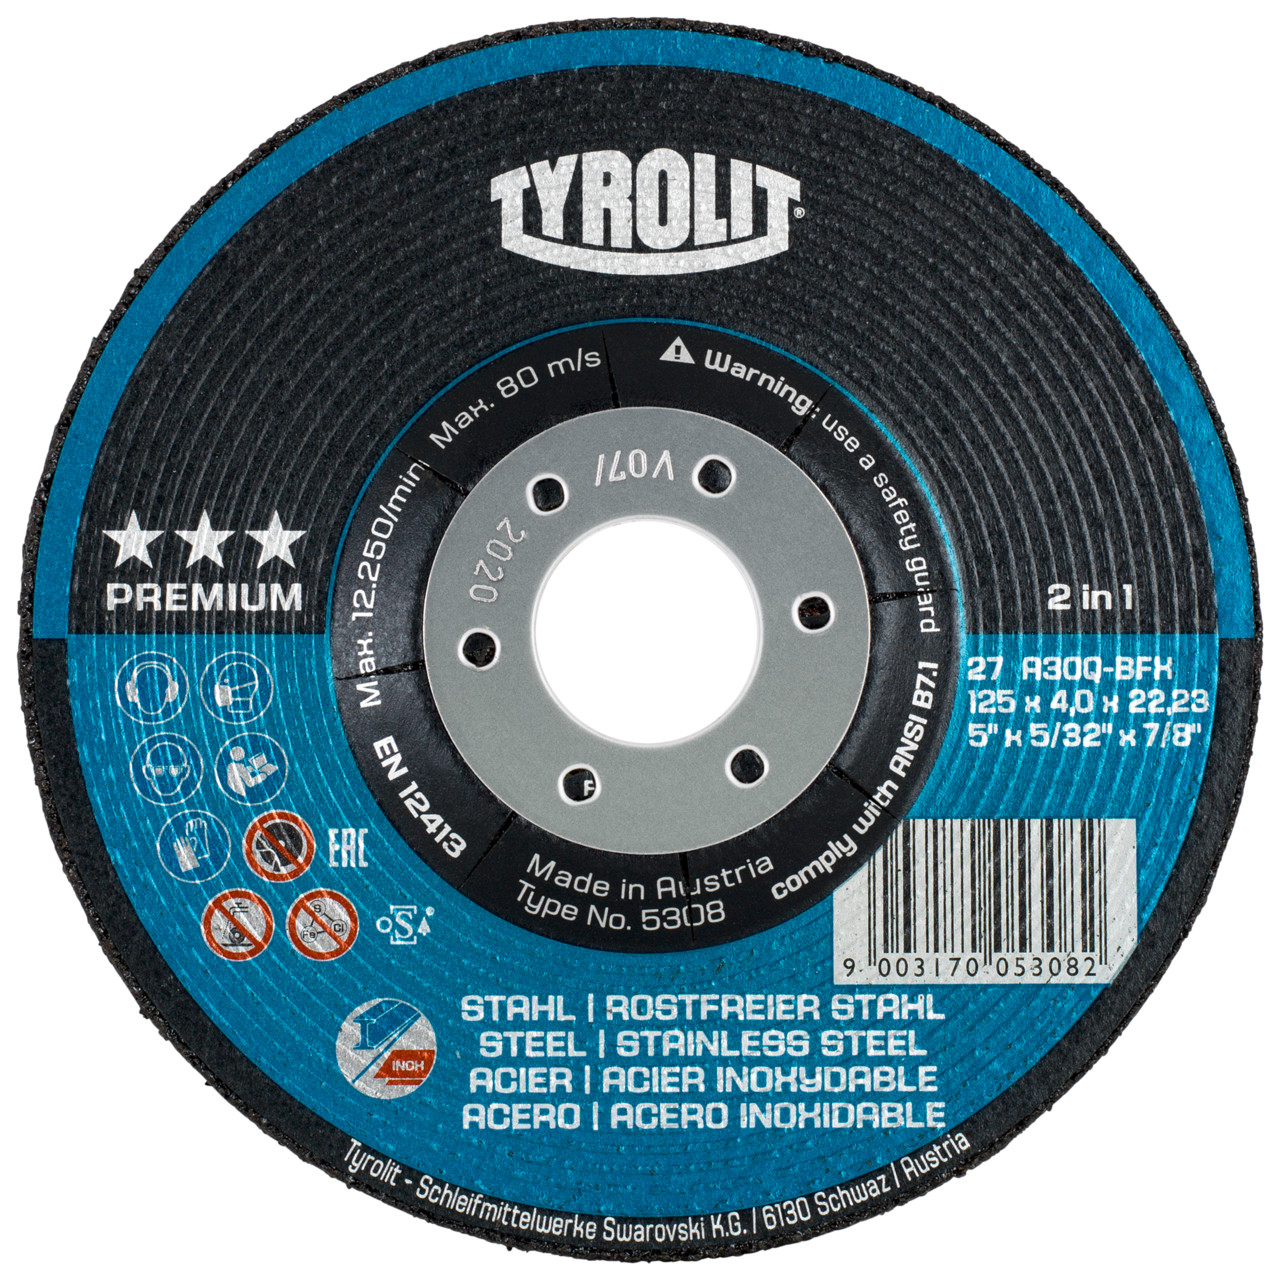 TYROLIT grinding wheel DxUxH 230x8x22.23 2in1 for steel and stainless steel, shape: 27 - offset version, Art. 34046136